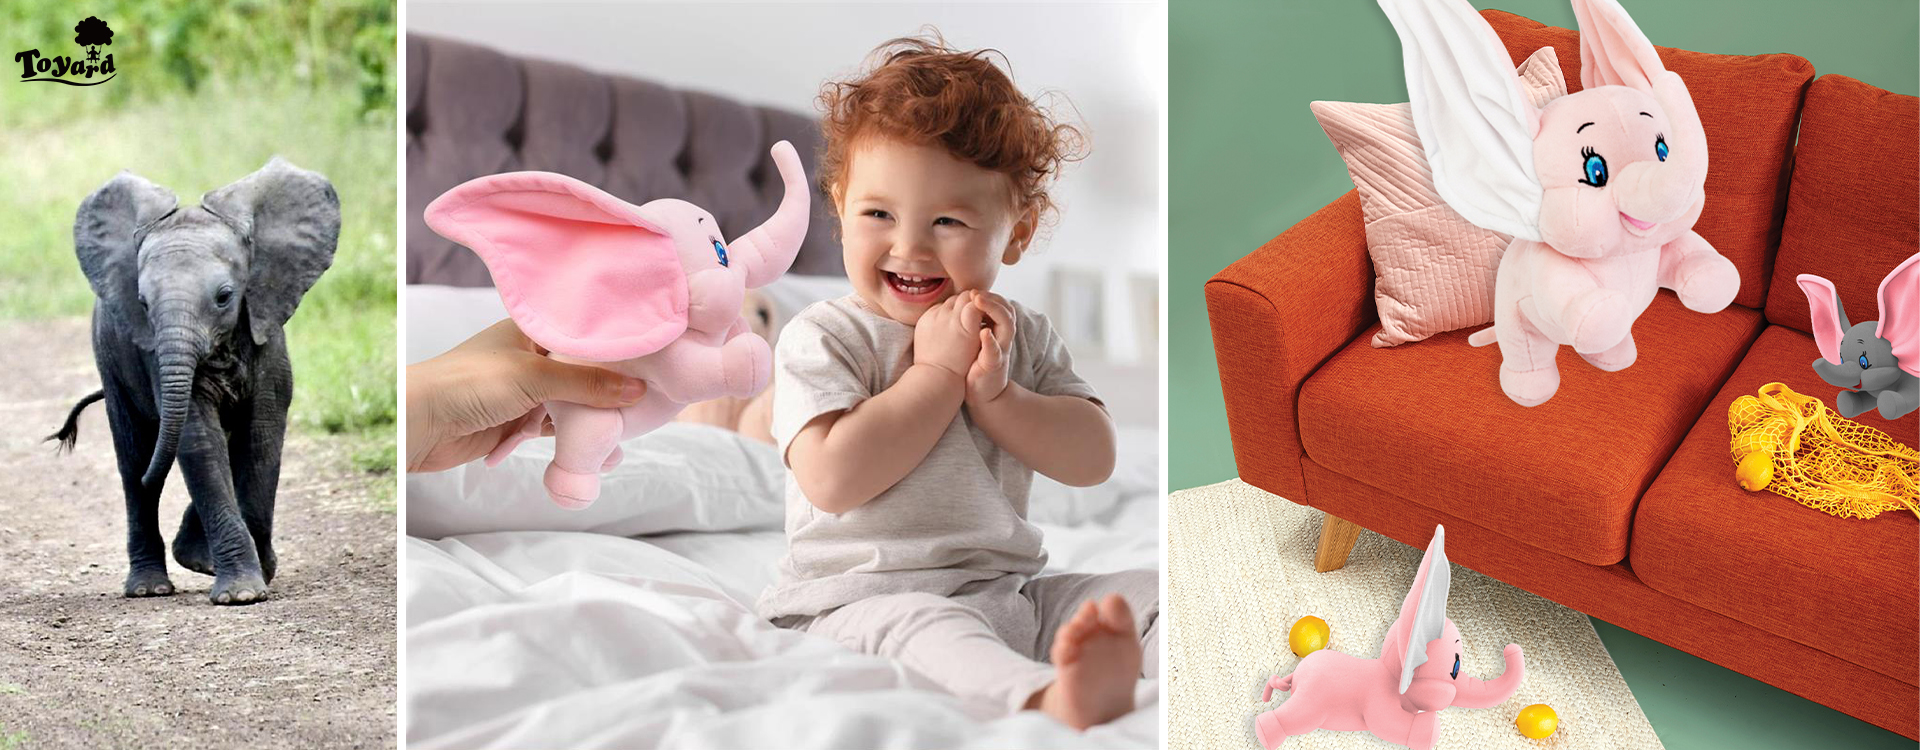 stuffed animal make childs Constantly Smiling